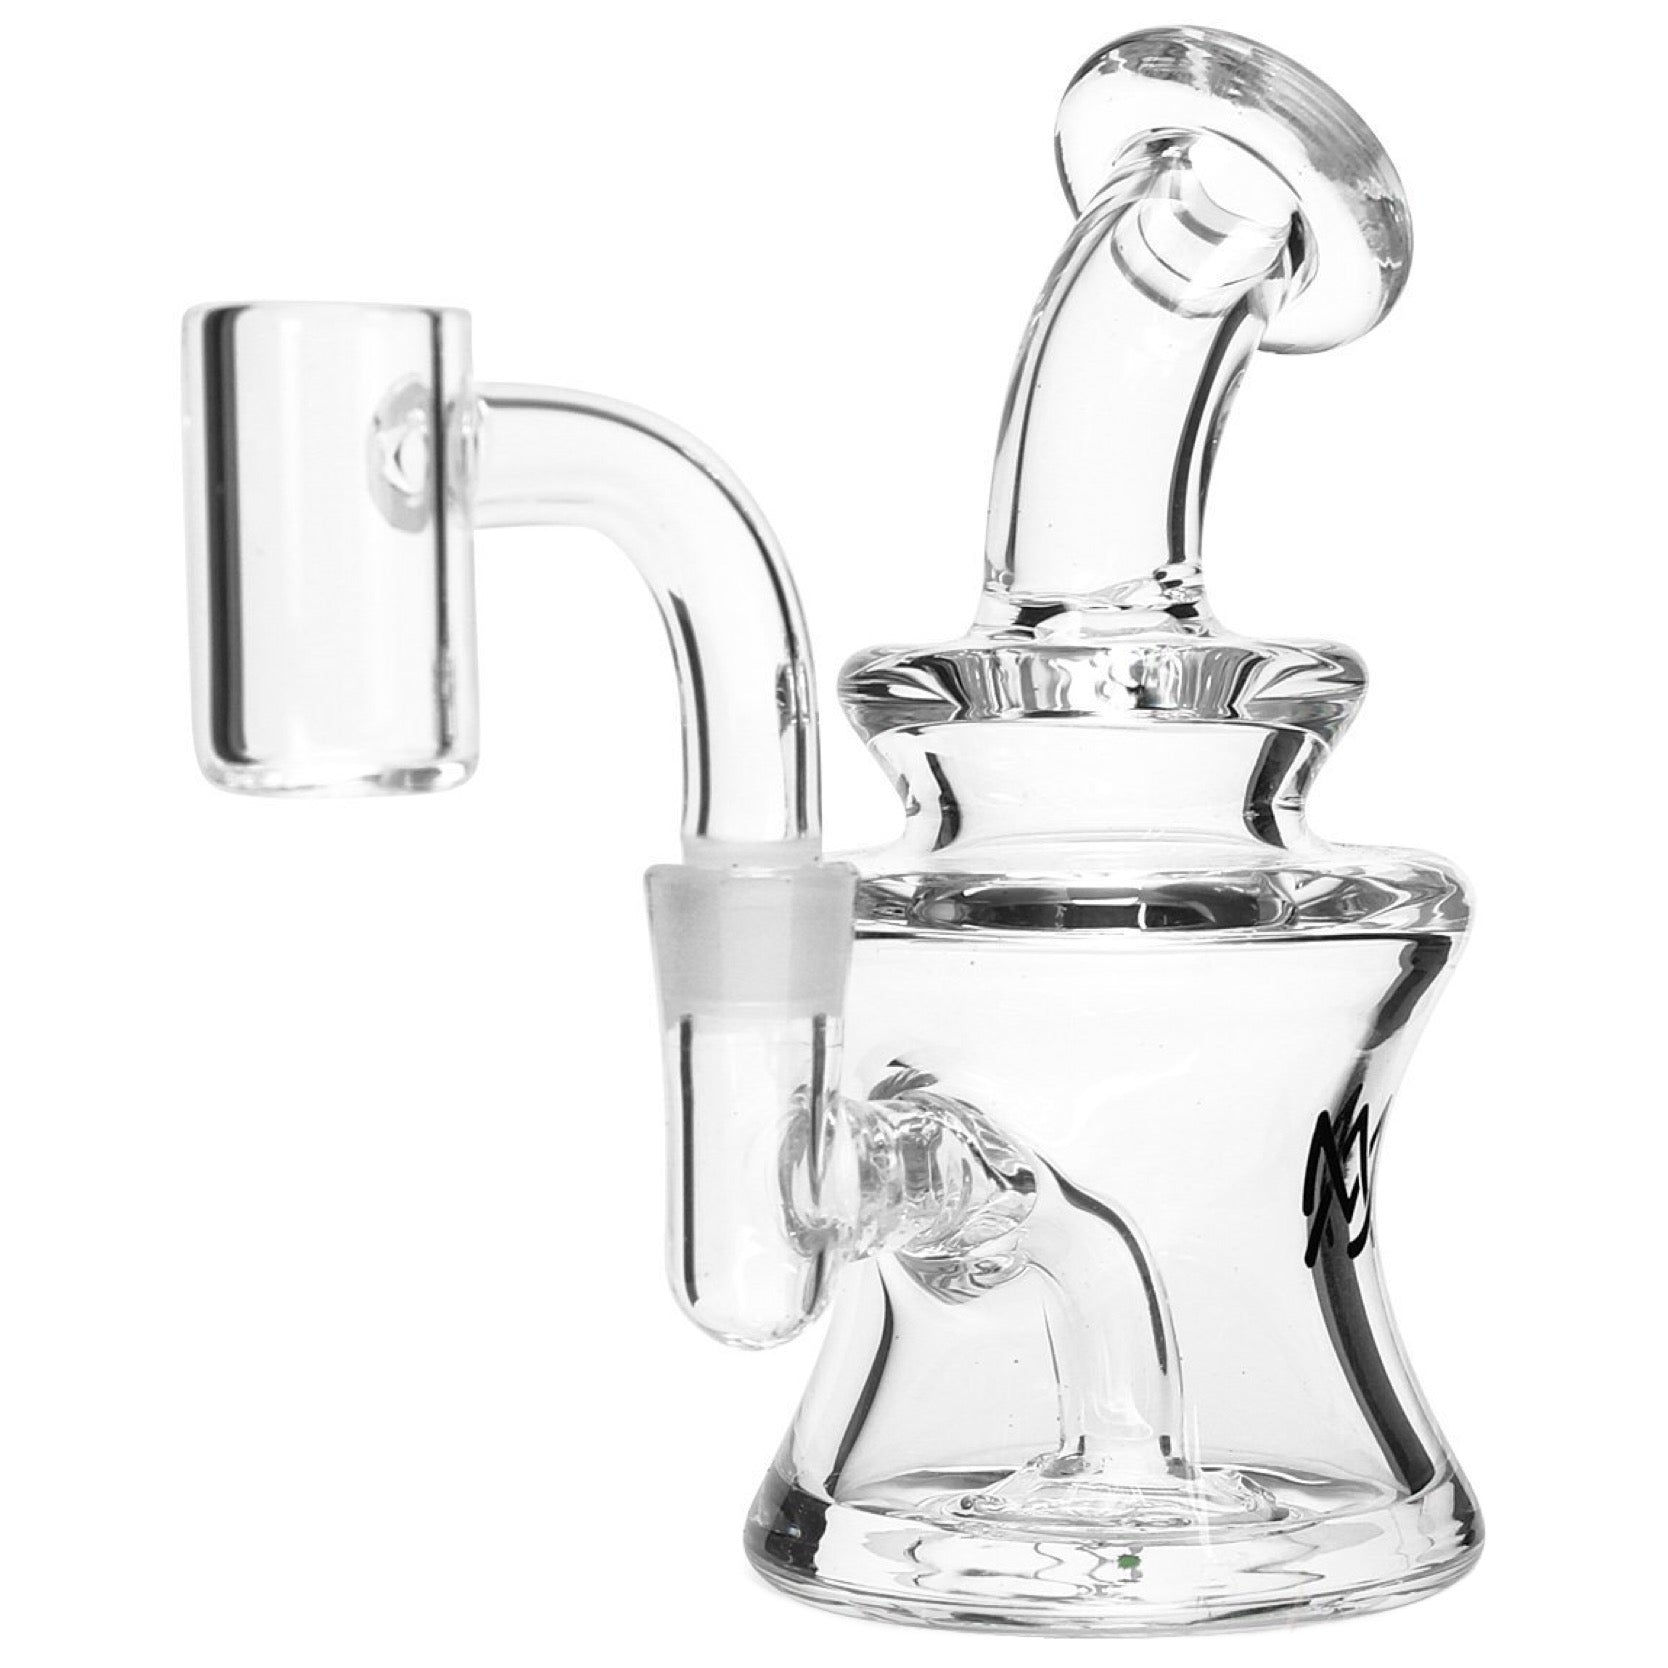 MJ Arsenal “Jammer” Mini Rig by MJ Arsenal | Mission Dispensary